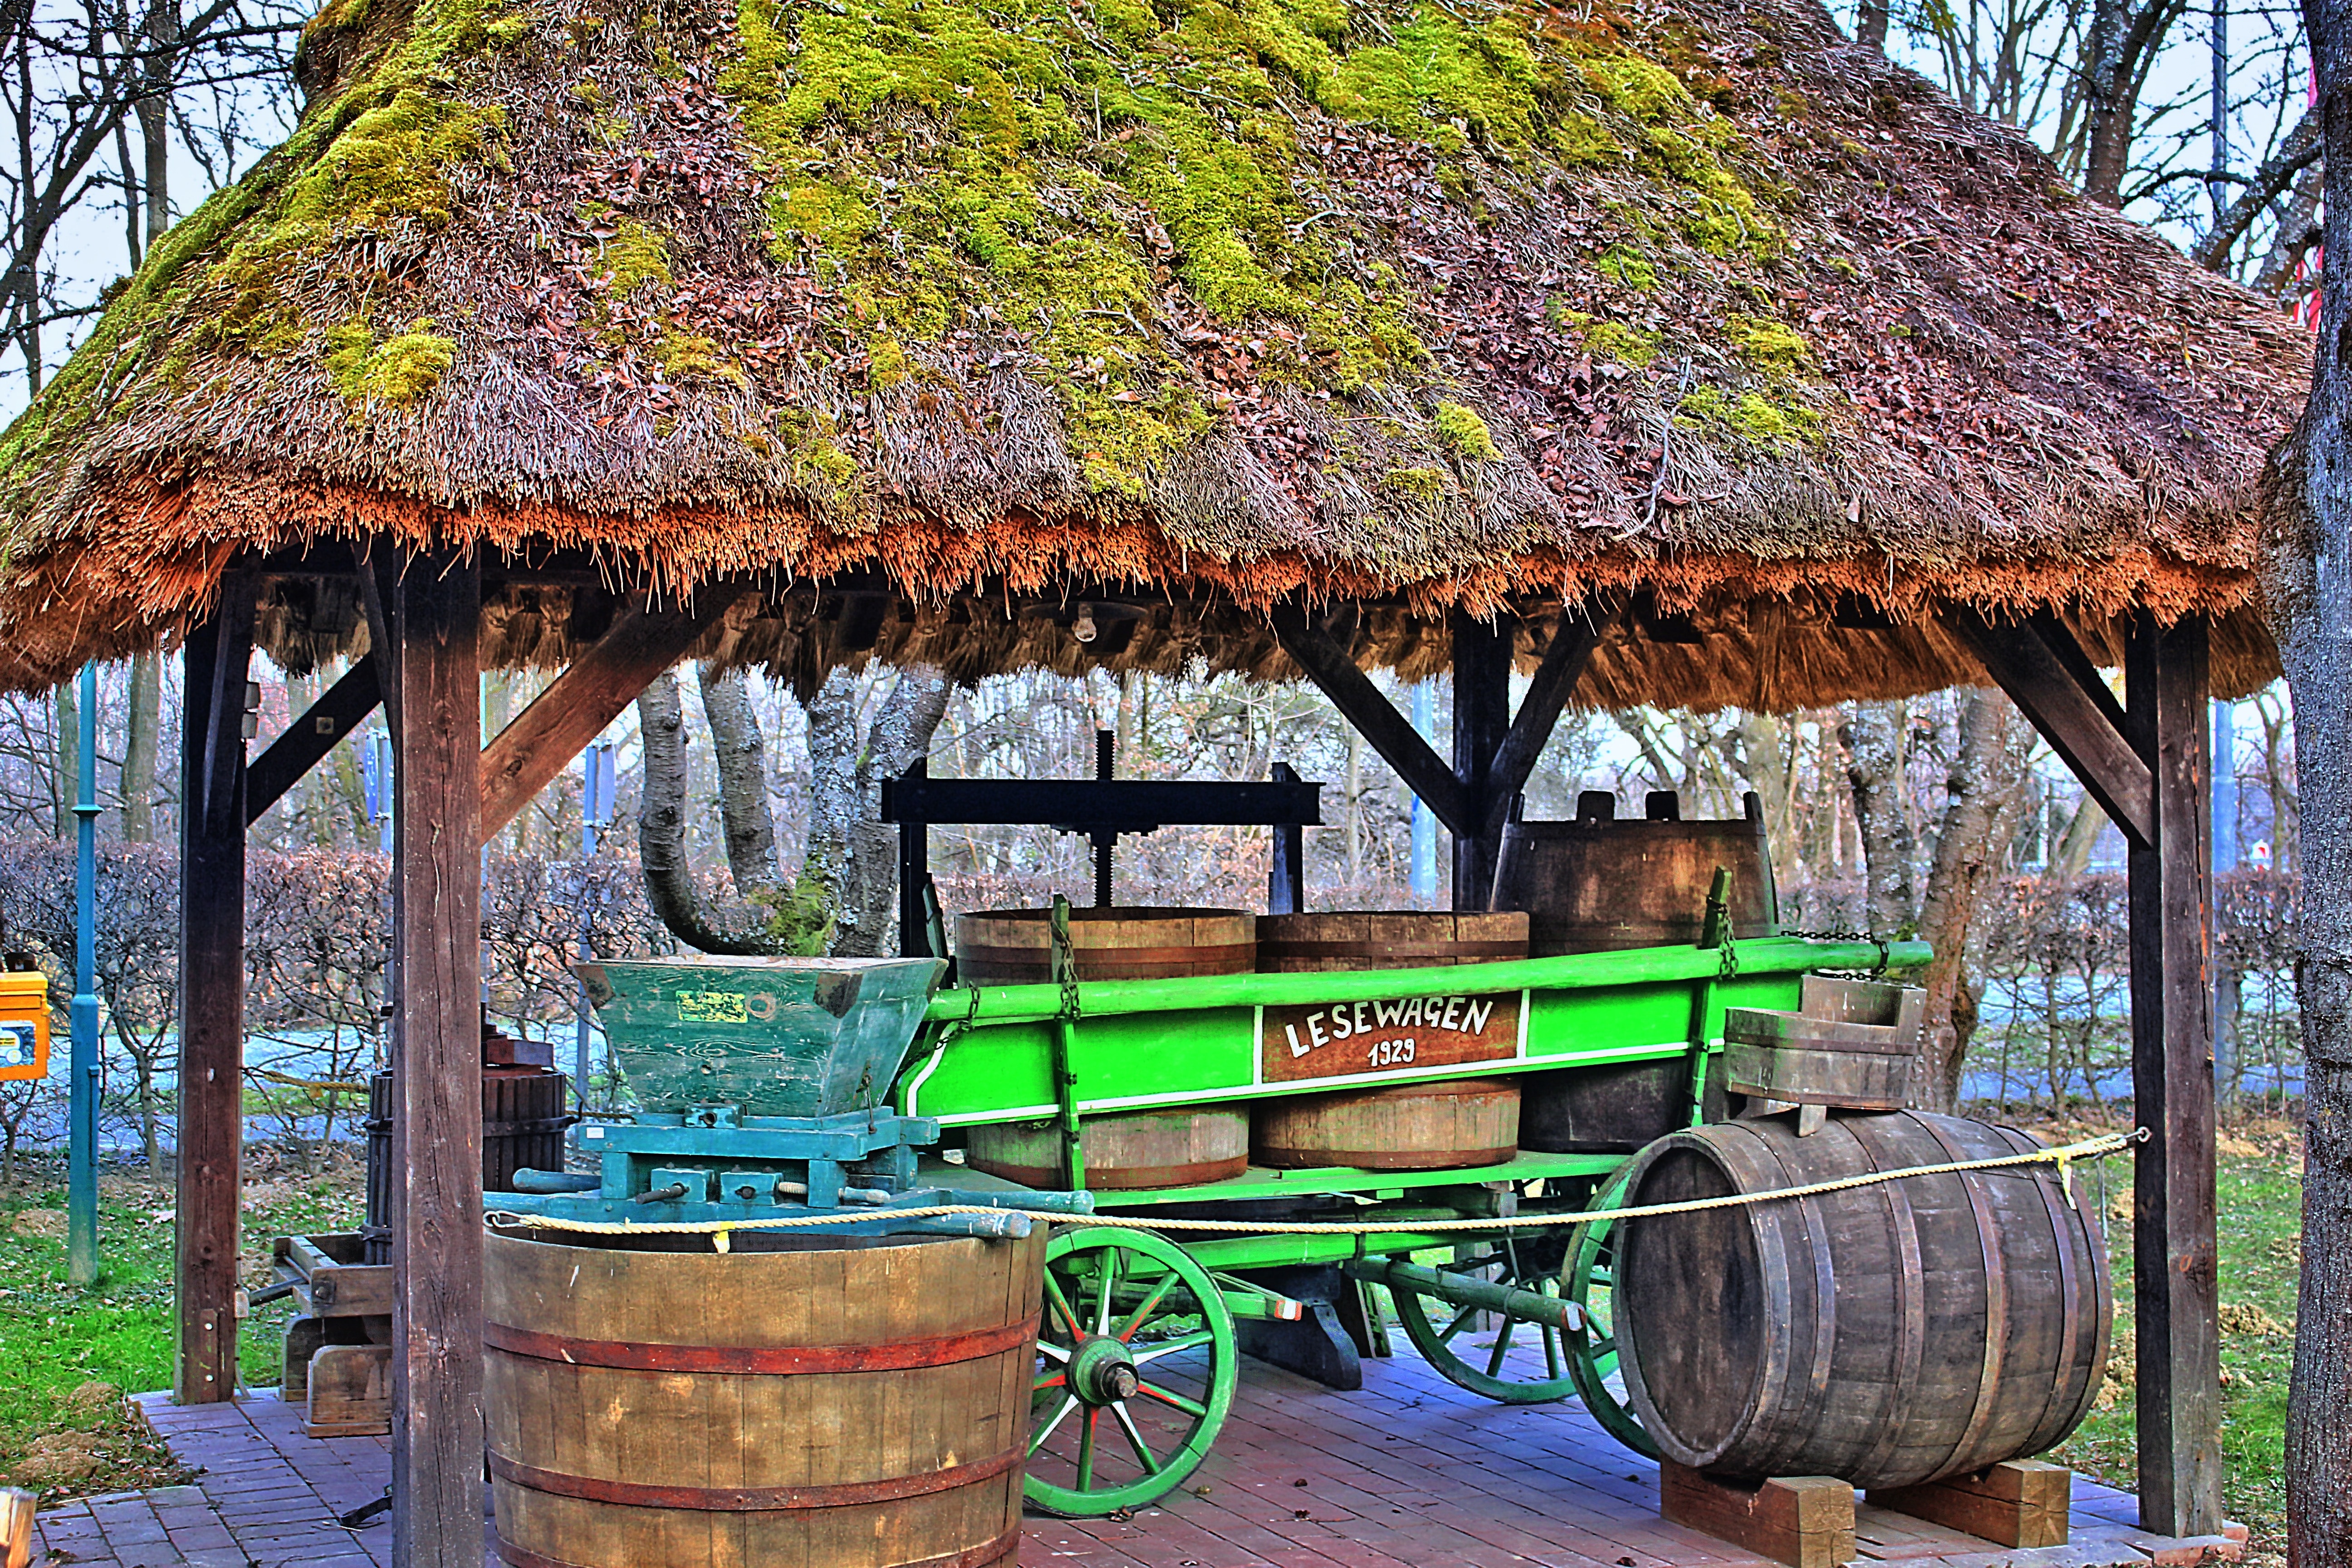 green carriage with wooden barrels